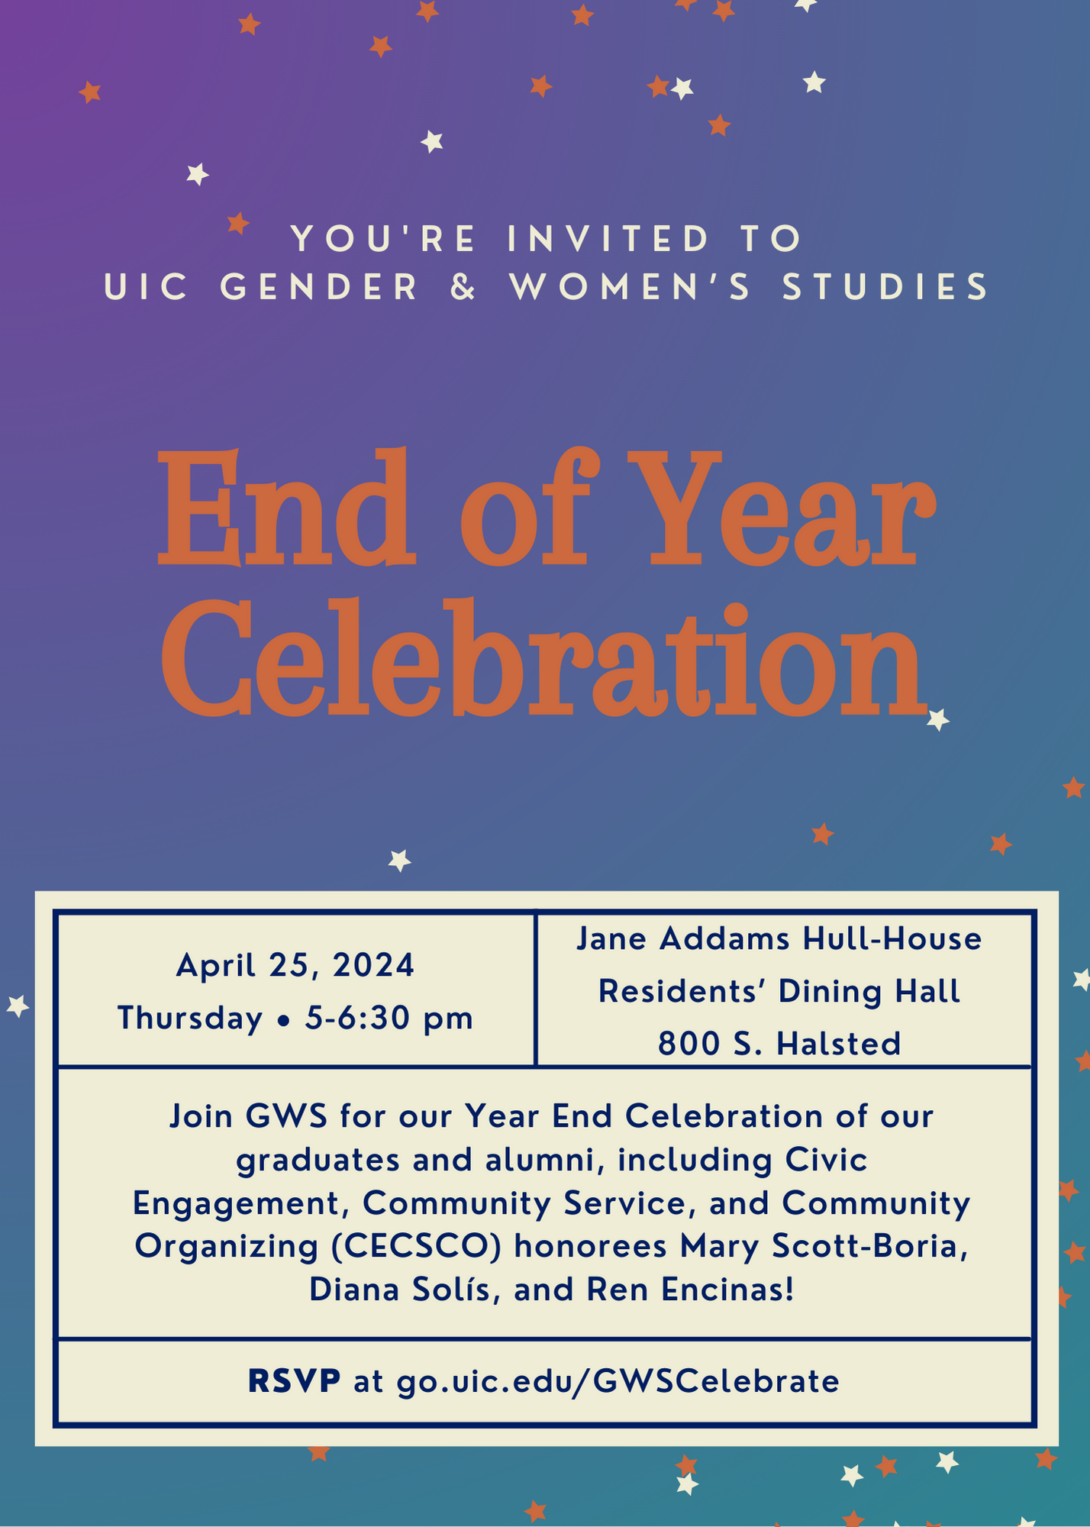 Flyer with purple to blue to teal gradient background. White text in the top center of the flyer reads You're Invited to UIC Gender & Women's Studies. Beneath that text in large orange text reads End of Year Celebration. Beneath that text is a cream colored rectangle that includes event date, time, location, description, and RSVP link in dark blue font. There are small orange and white stars along the top and bottom of the flyer.